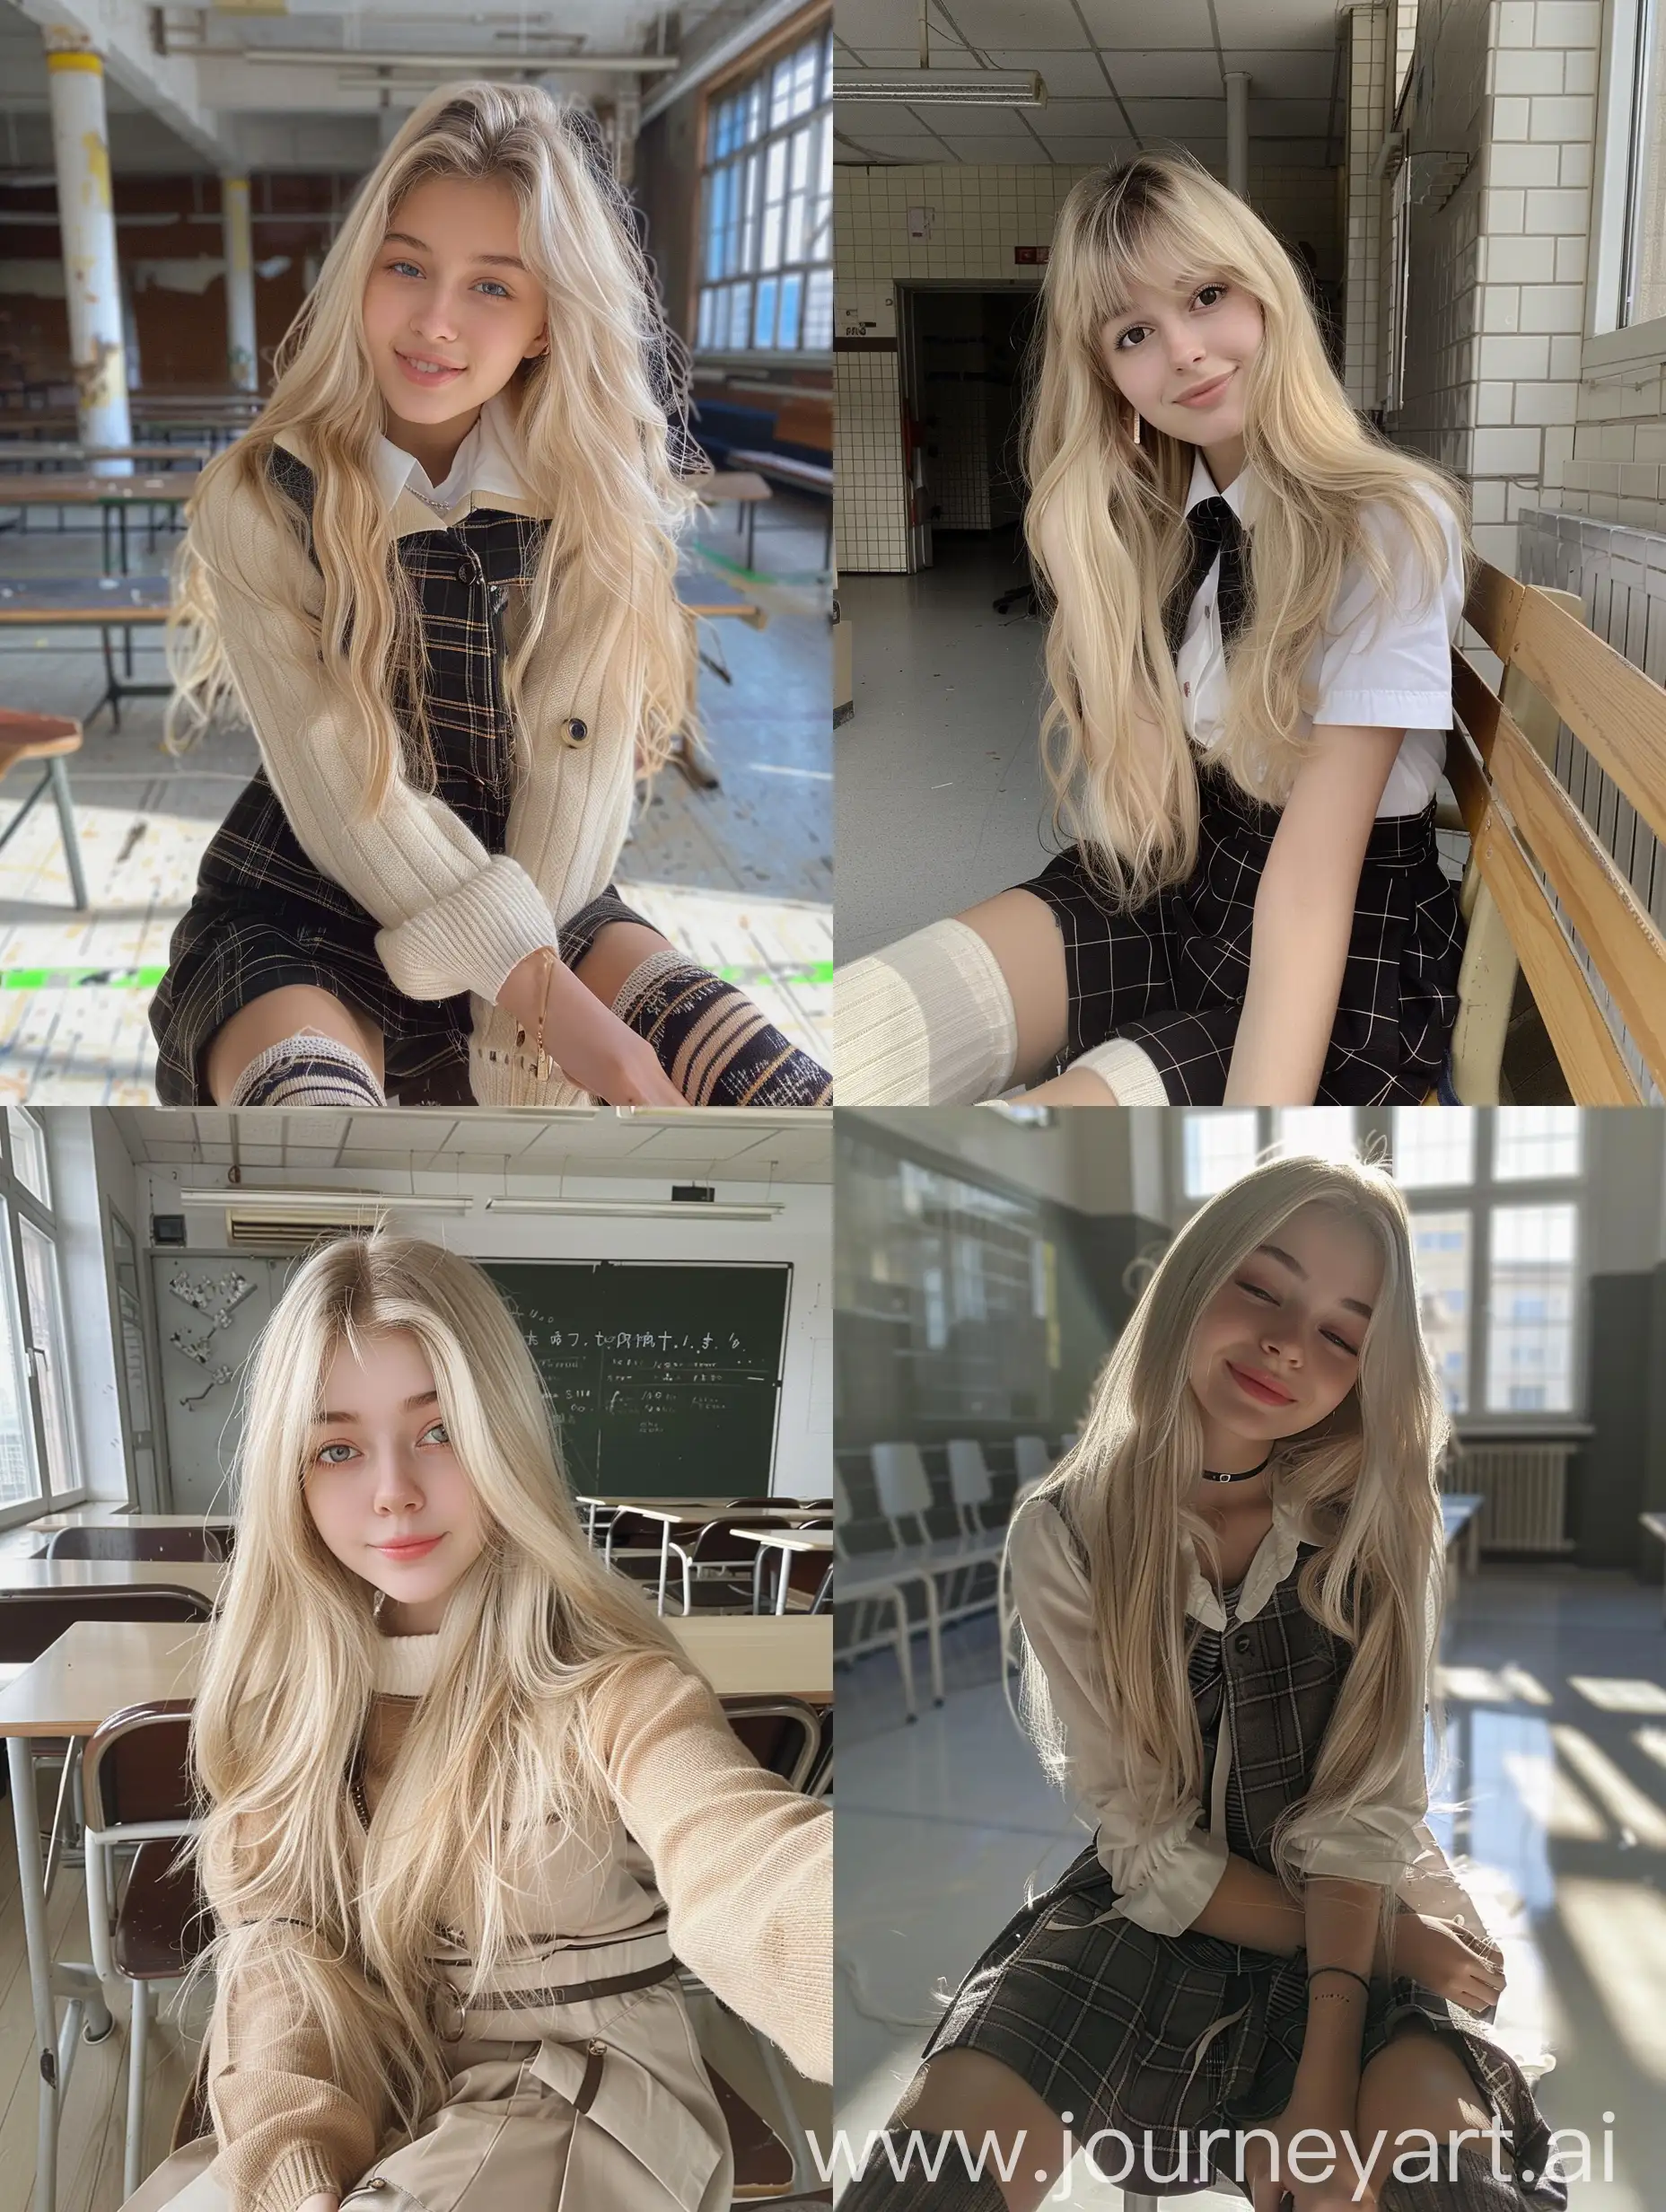 1 Ukrainian girl, long blond hair , 22 years old, influencer, beauty , in the school ,school japan uniform , makeup, smiling, chão view, sitting on chair , socks and boots, no effect, selfie , iphone selfie, no filters , iphone photo natural